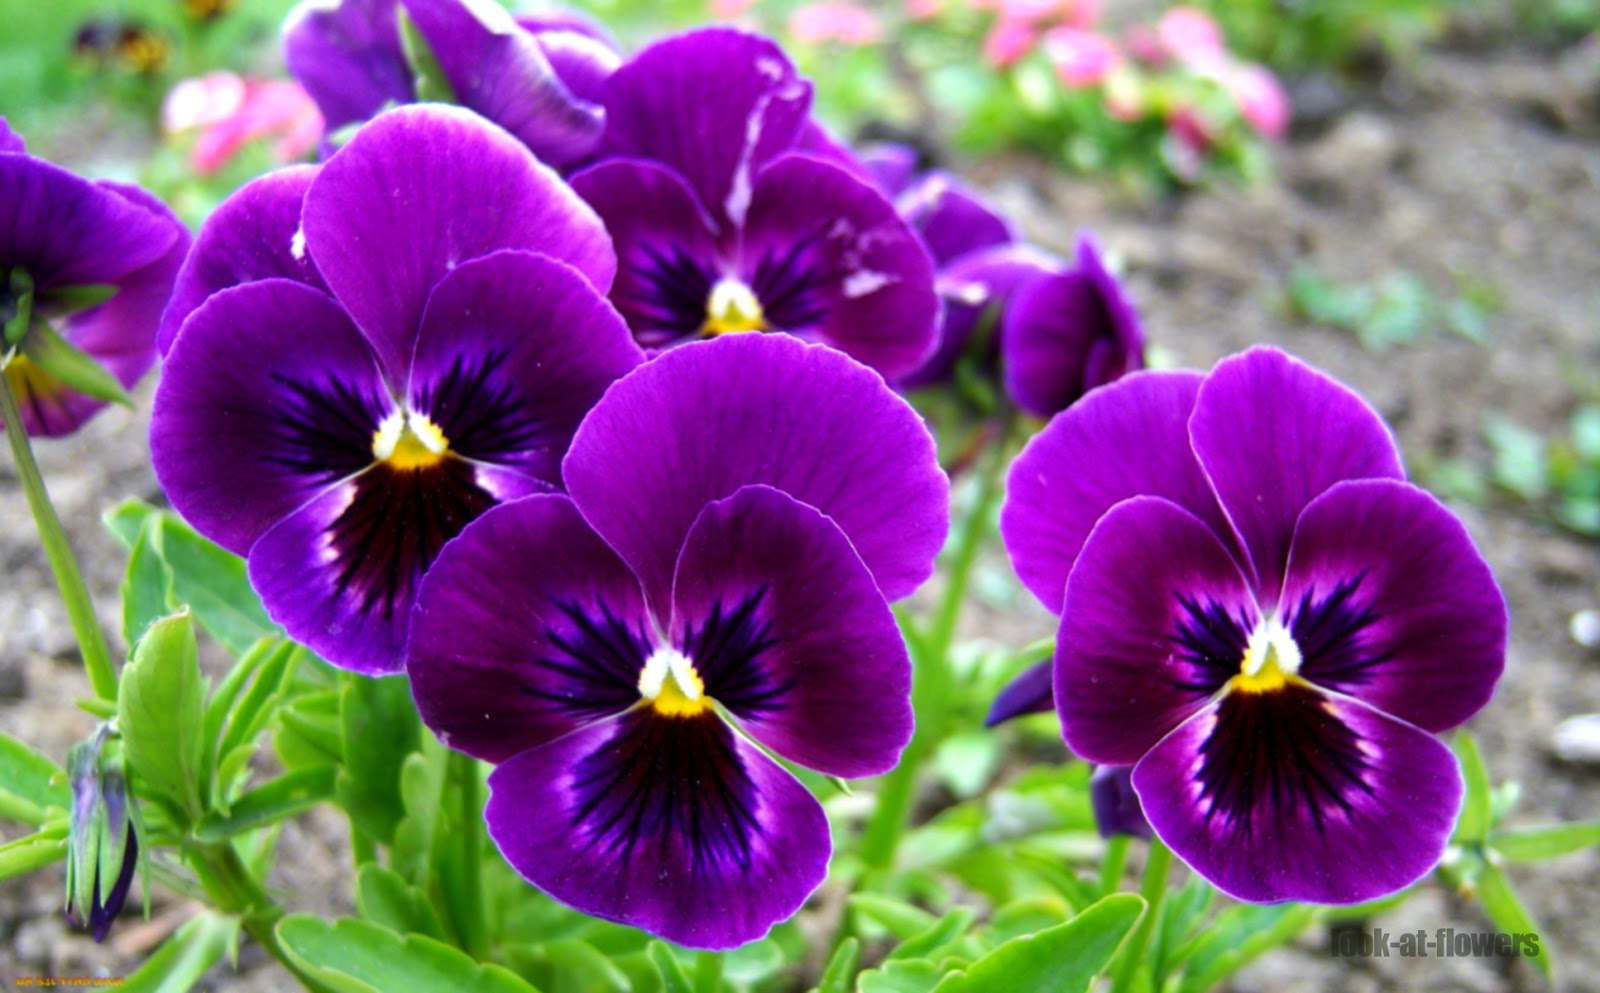 Pansy flower|Pictures of flowers